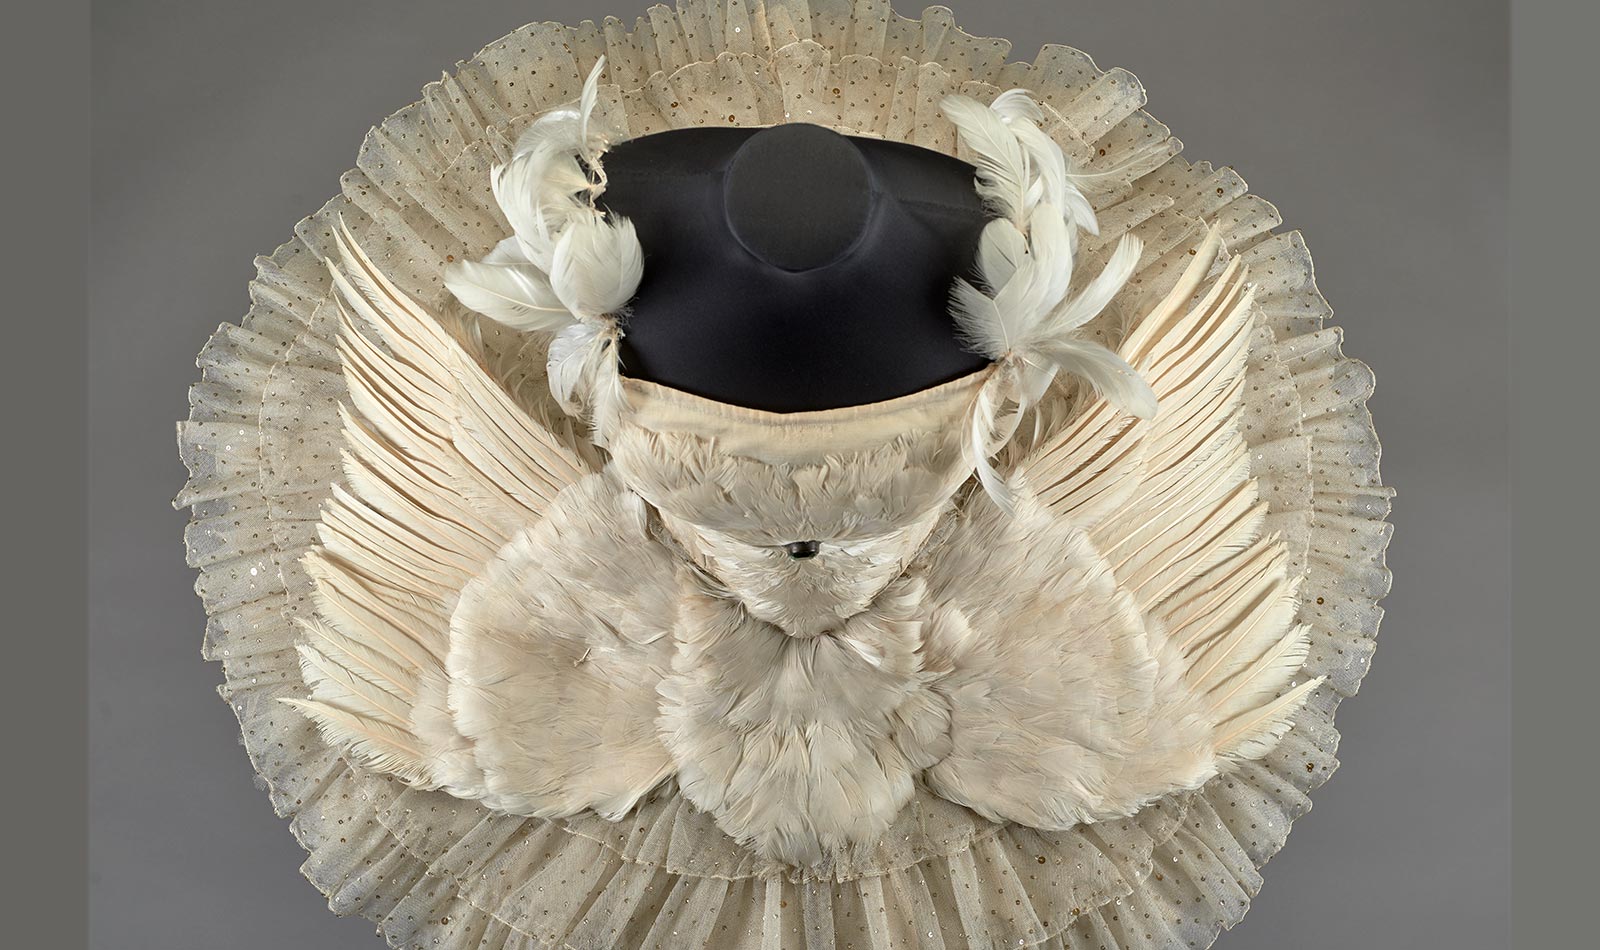 Anna Pavlova’s Dying Swan costume from above, after conservation